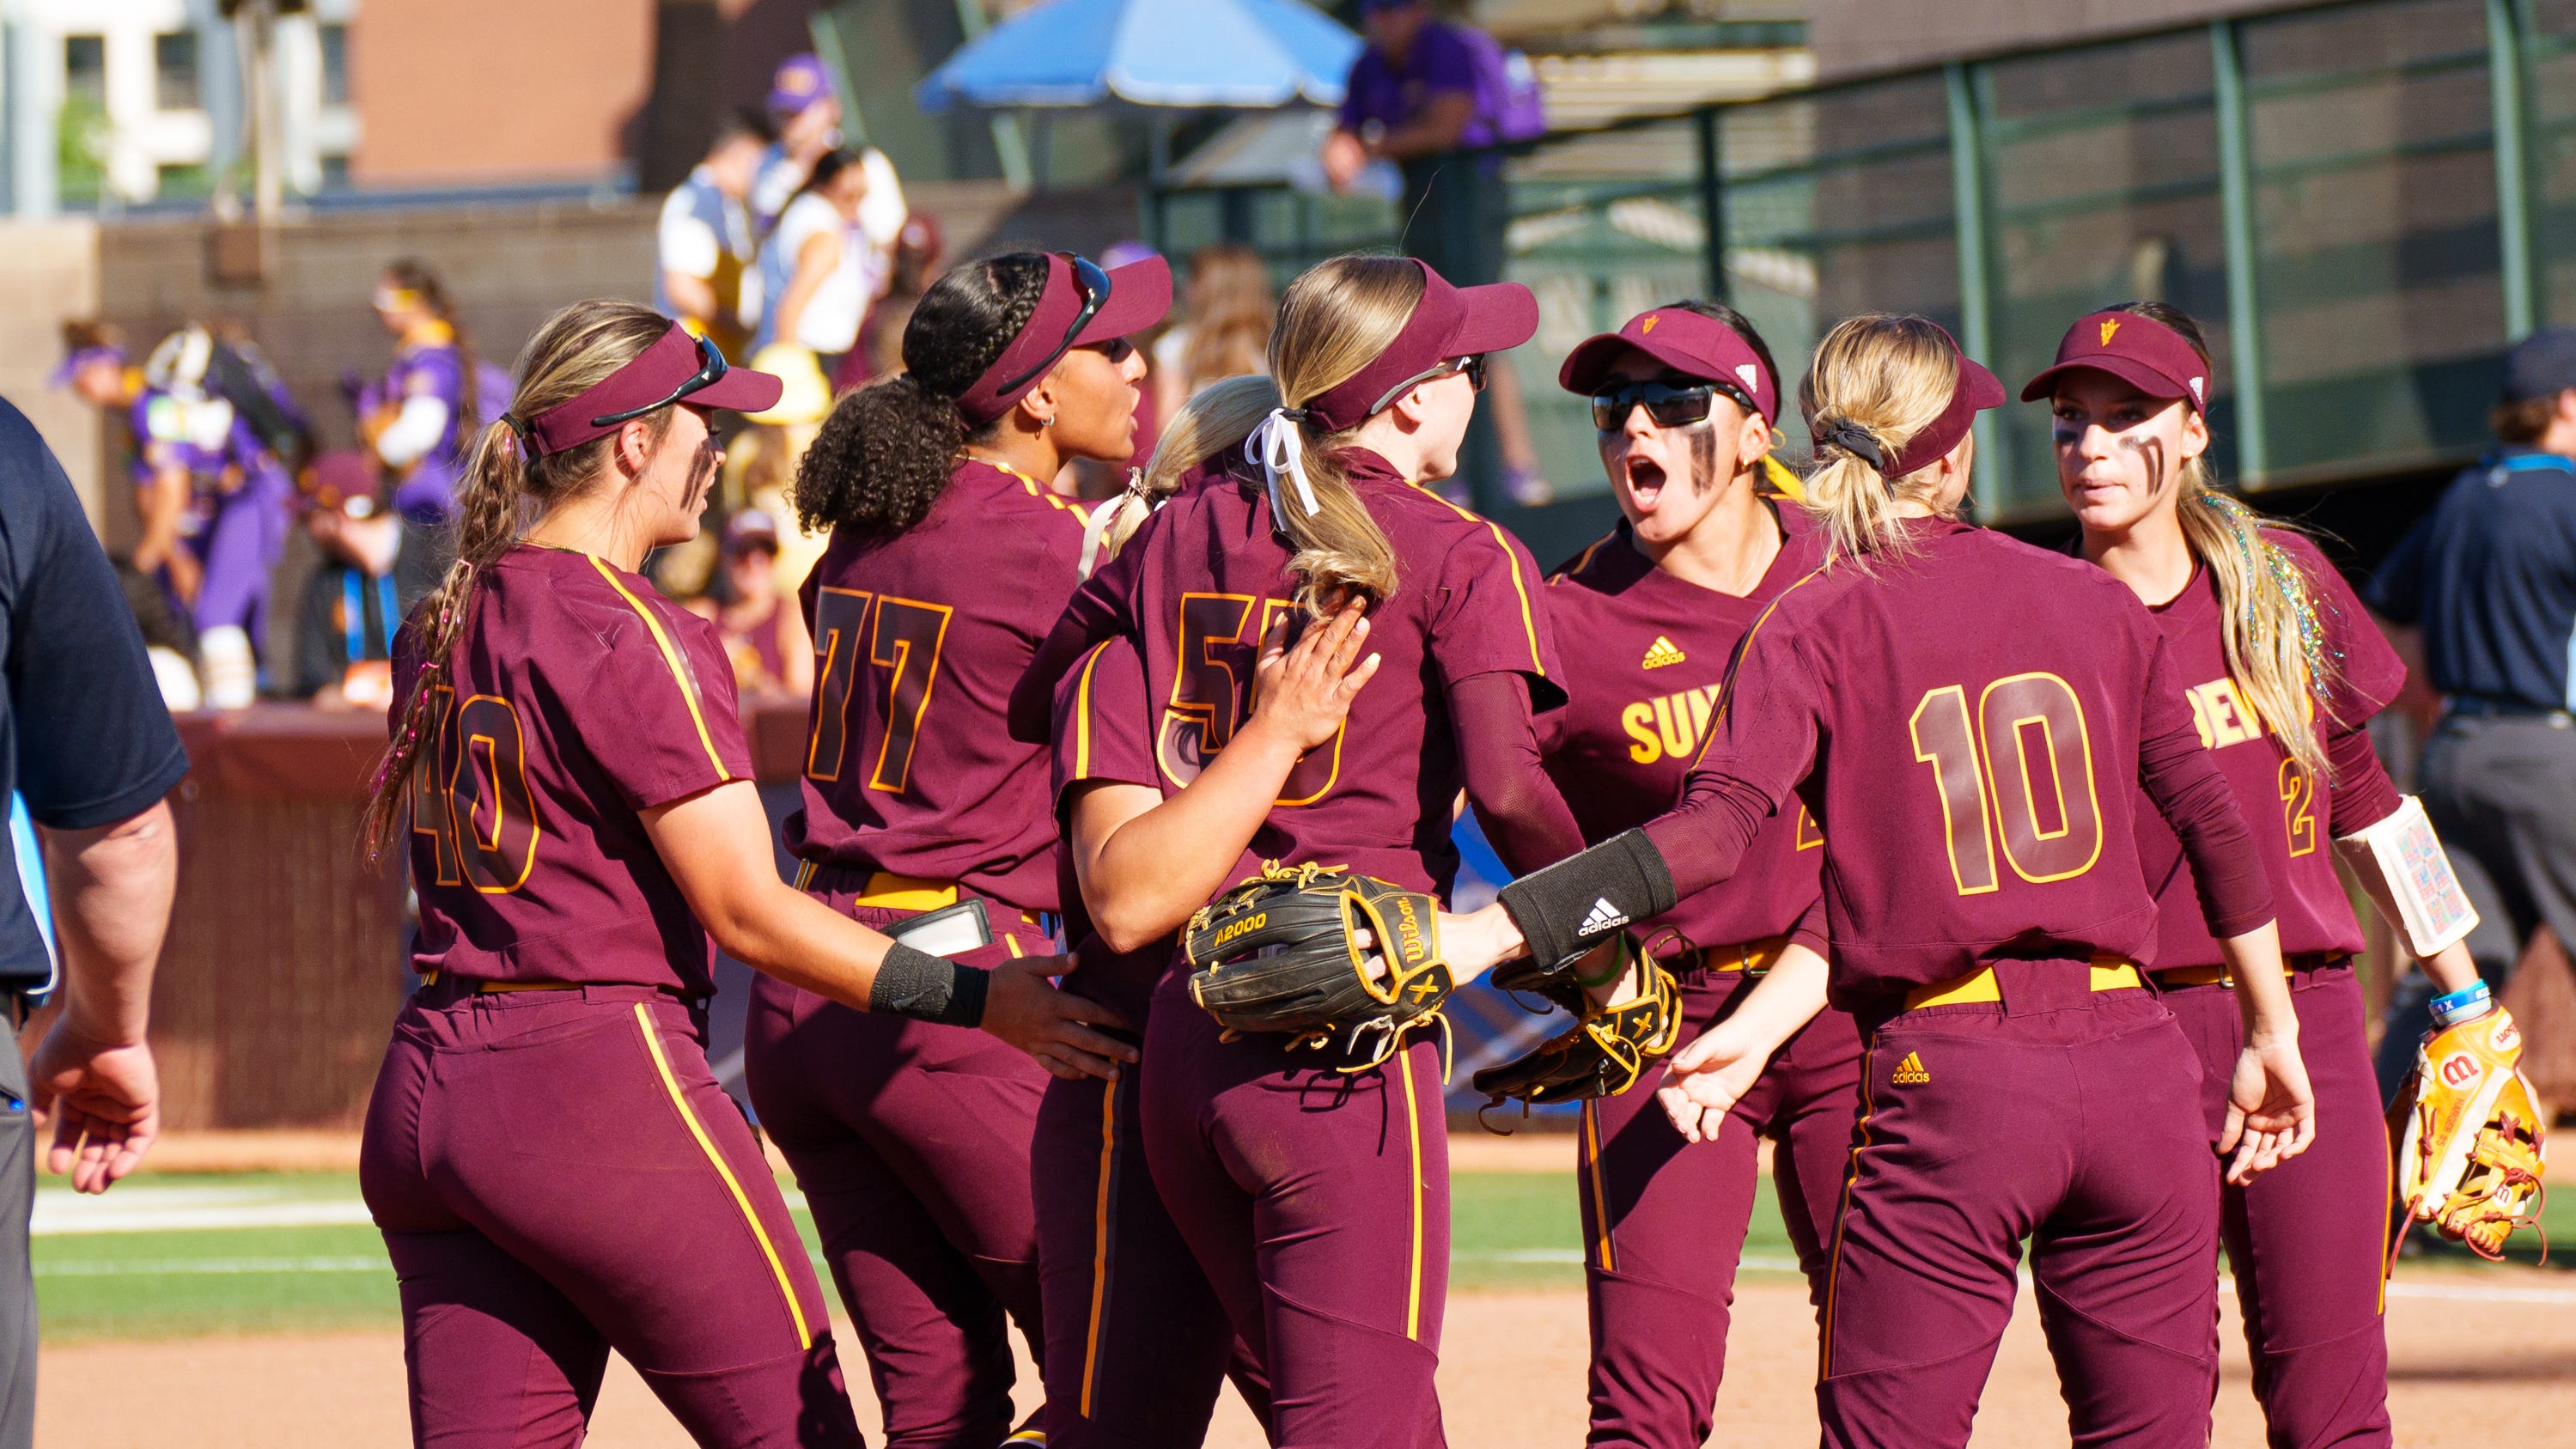 Pac12 softball teams shine in NCAA Regionals with 5 teams advancing